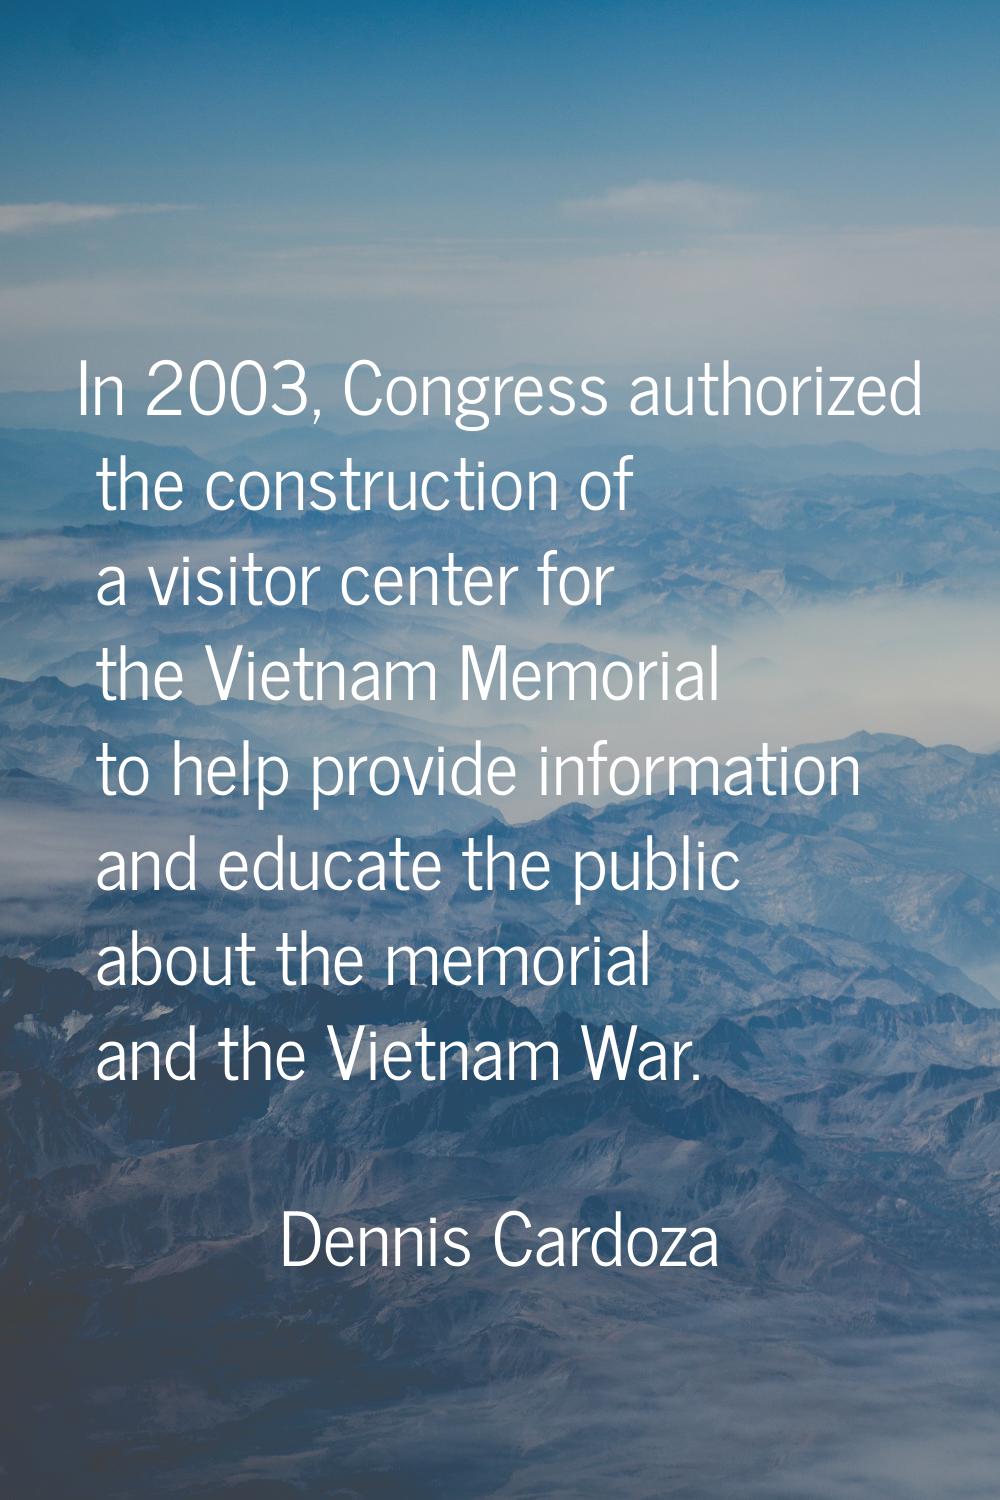 In 2003, Congress authorized the construction of a visitor center for the Vietnam Memorial to help 